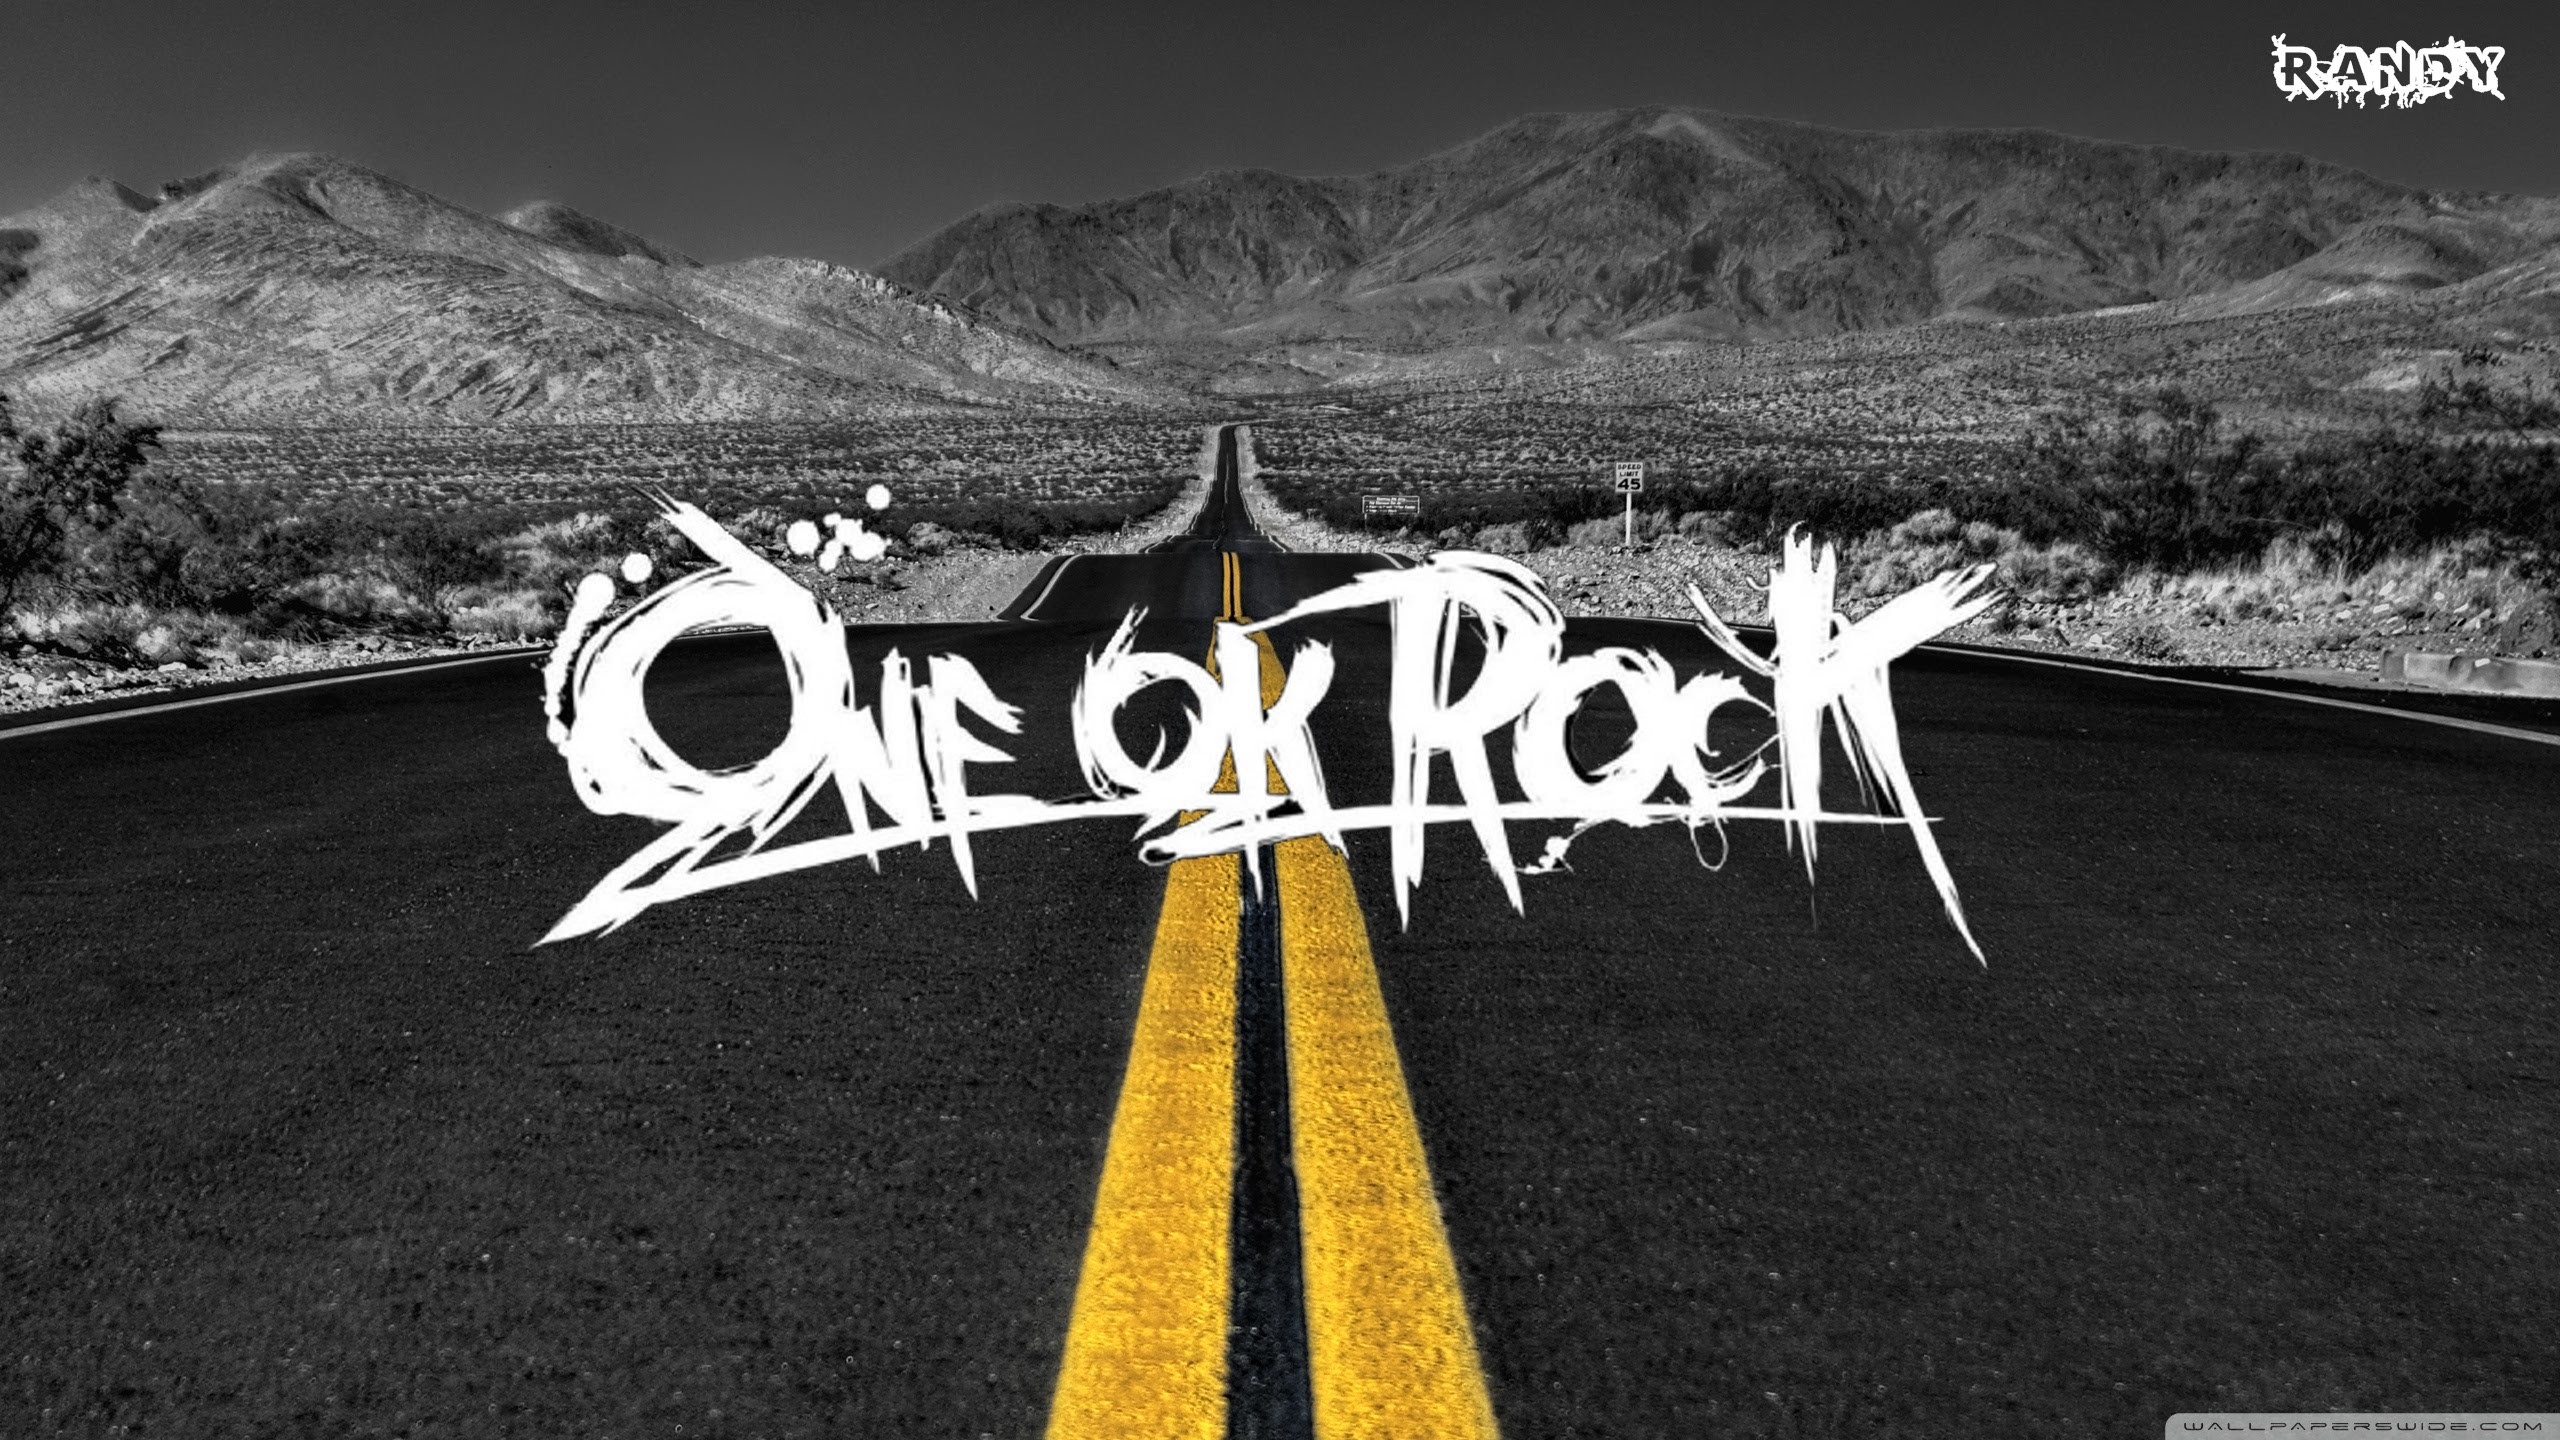 The Rock Hd Wallpapers For Pc Wallpaper Galaxy